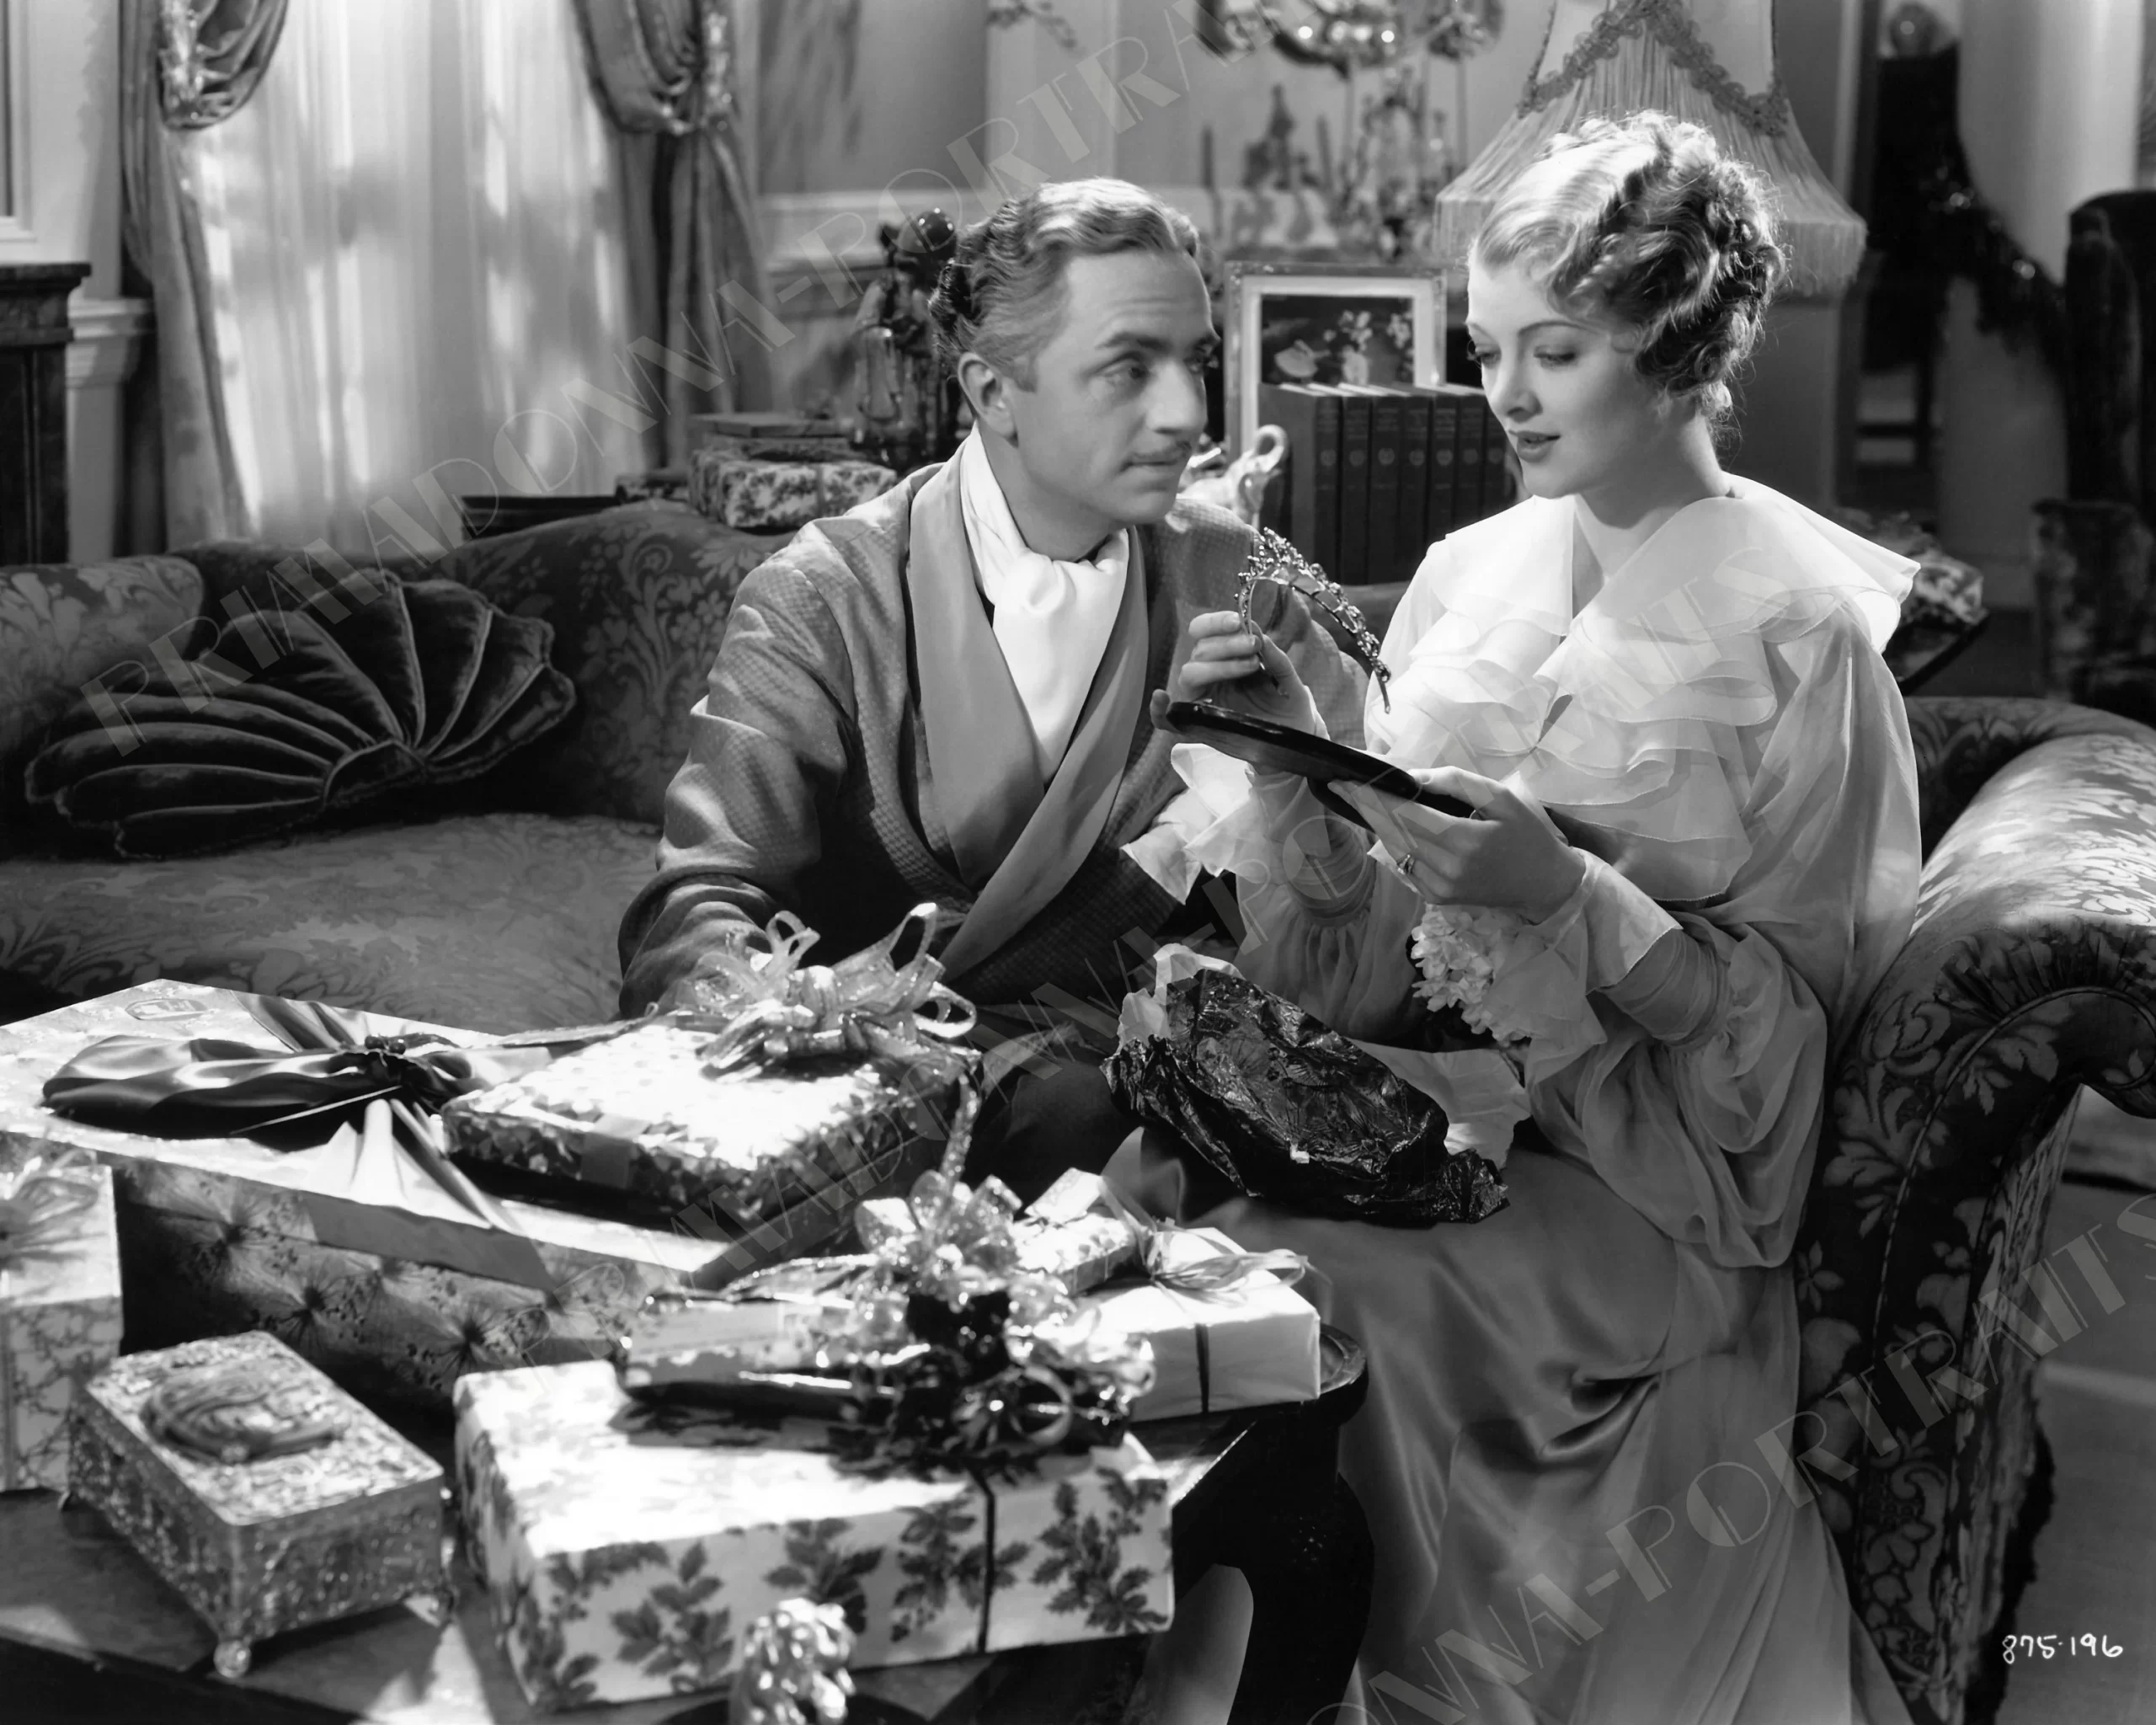 Every Best Picture: The Great Ziegfeld